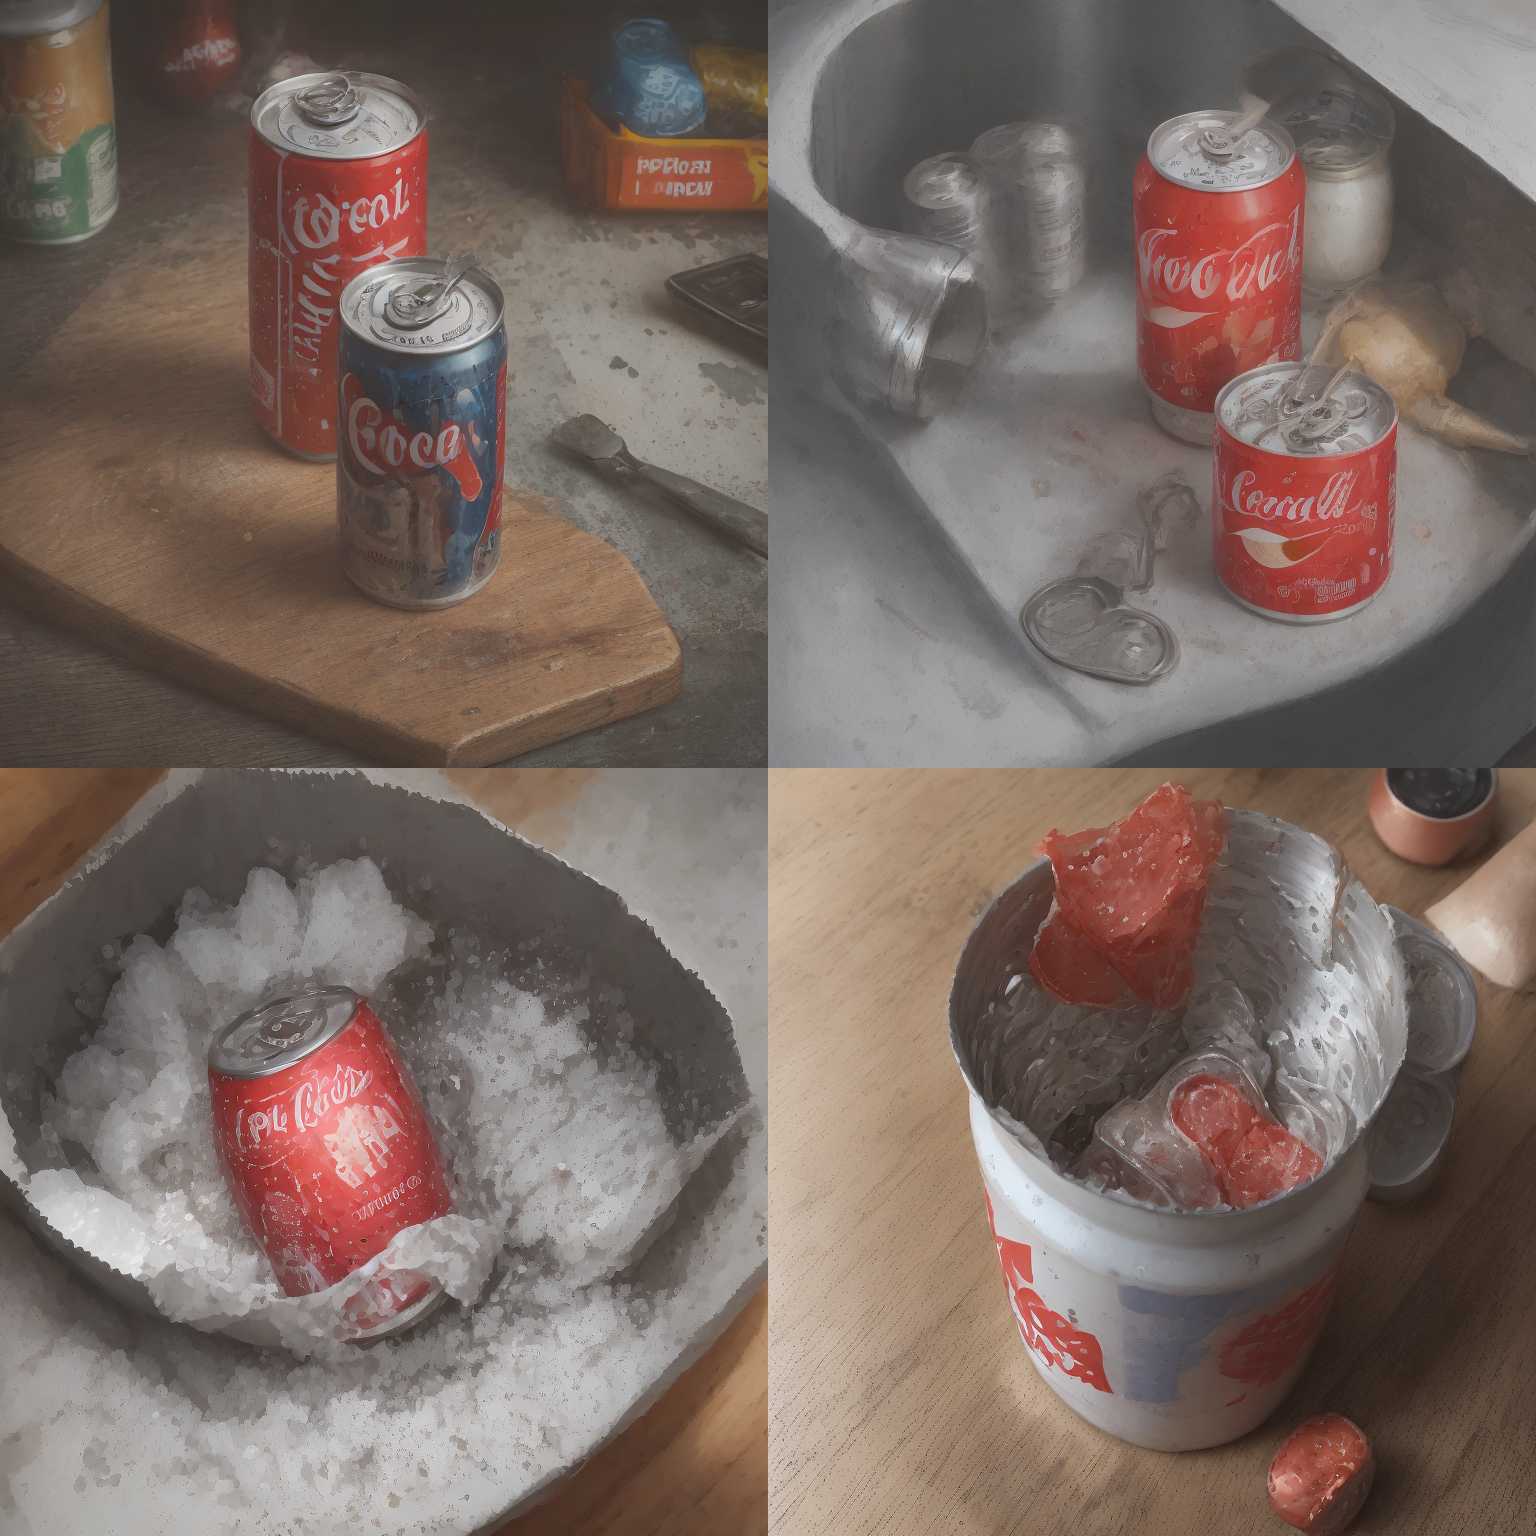 A soda can opened slowly